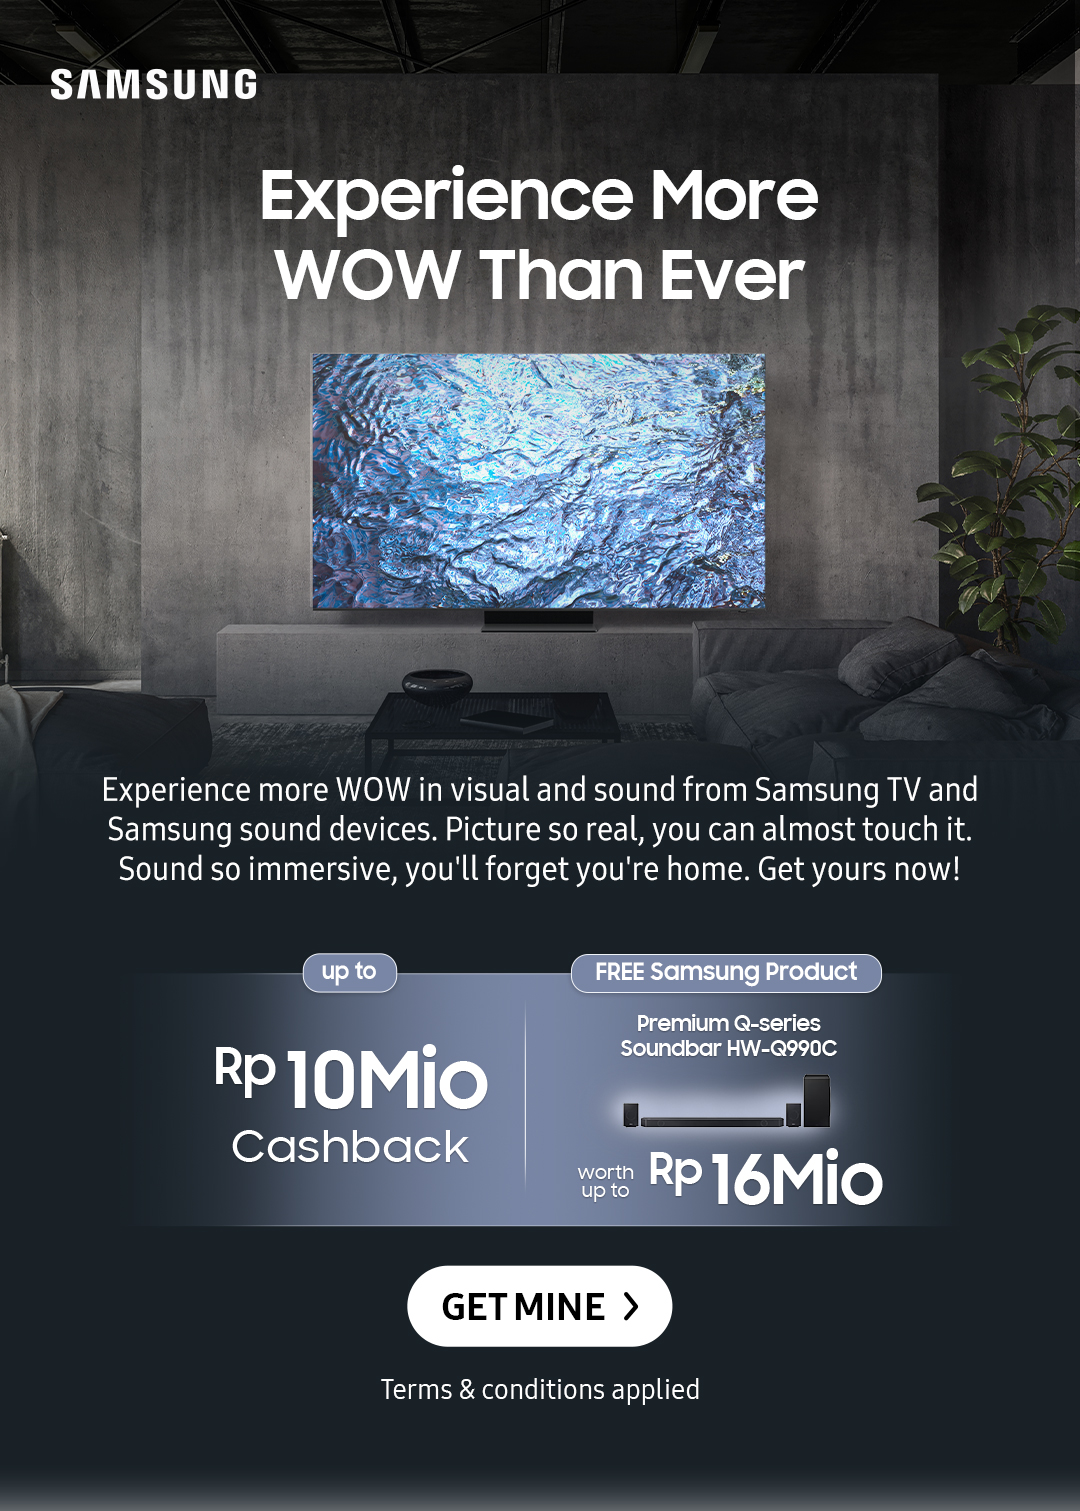 Experience More WOW Than Ever | Experience more WOW in visual and sound from Samsung TV and Samsung sound devices. Picture so real, you can almost touch it. Sound so immersive, you'll forget you're home. Get yours now!